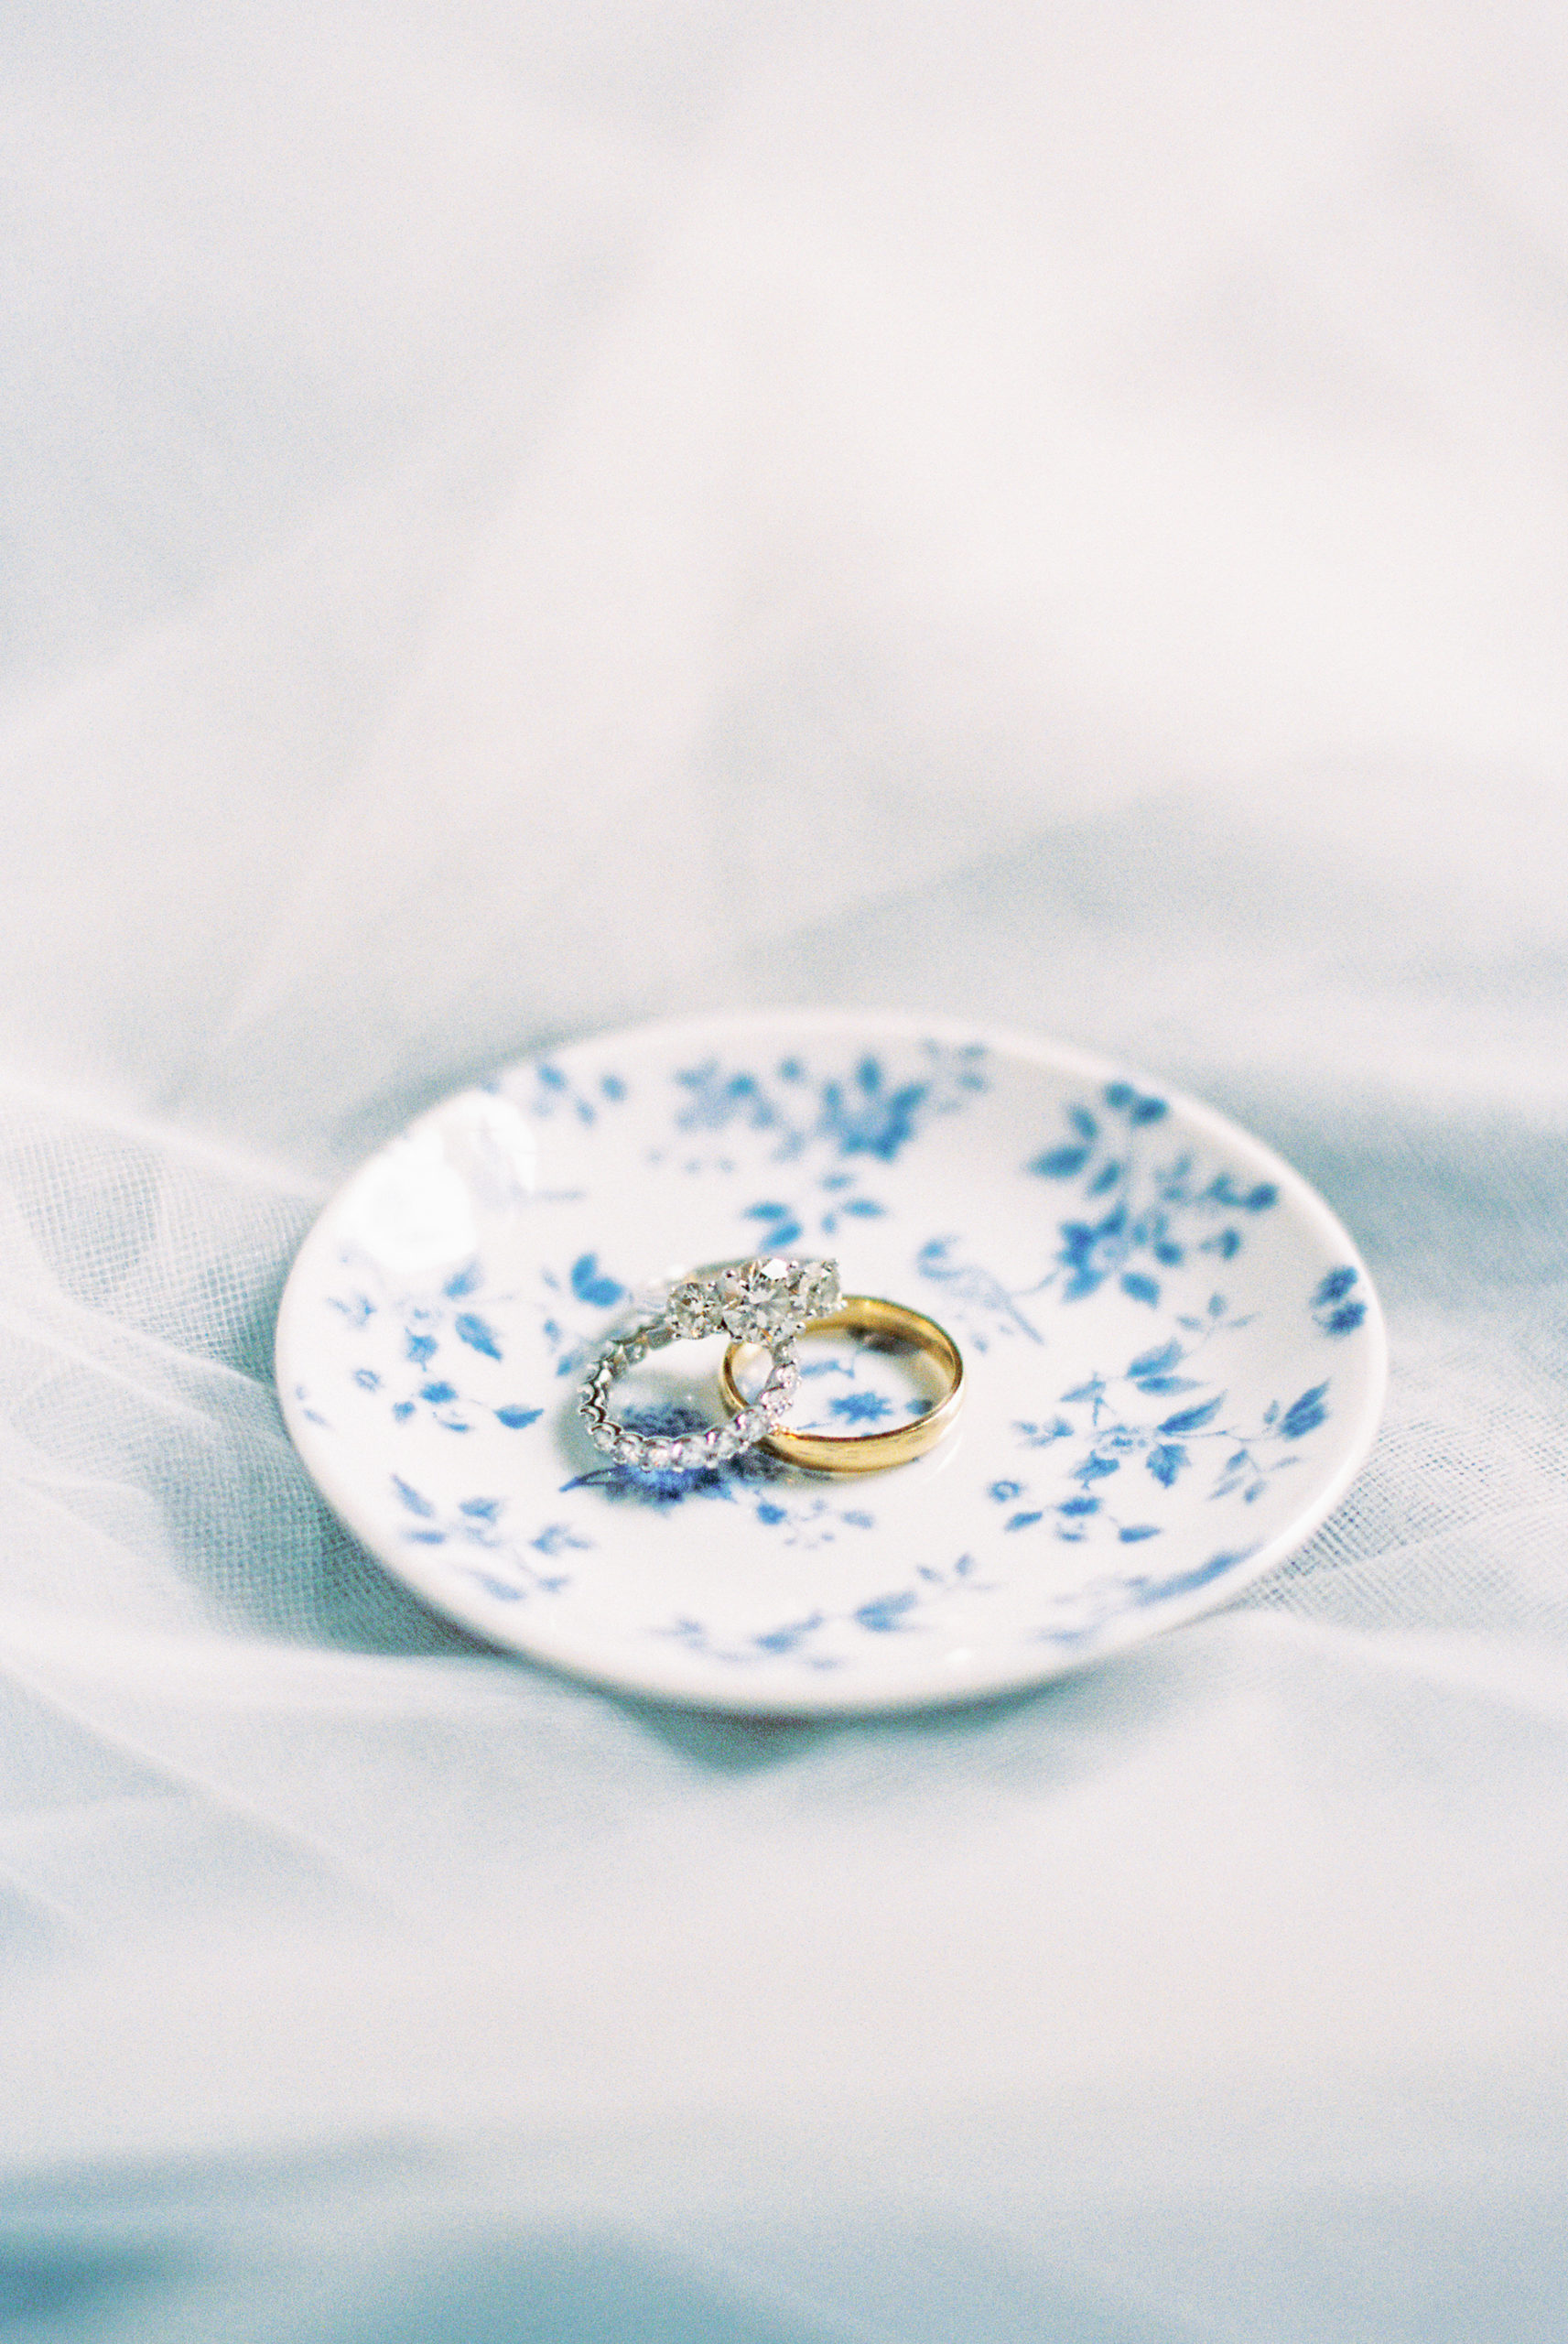 engagement ring care to keep your ring photo ready on your wedding day